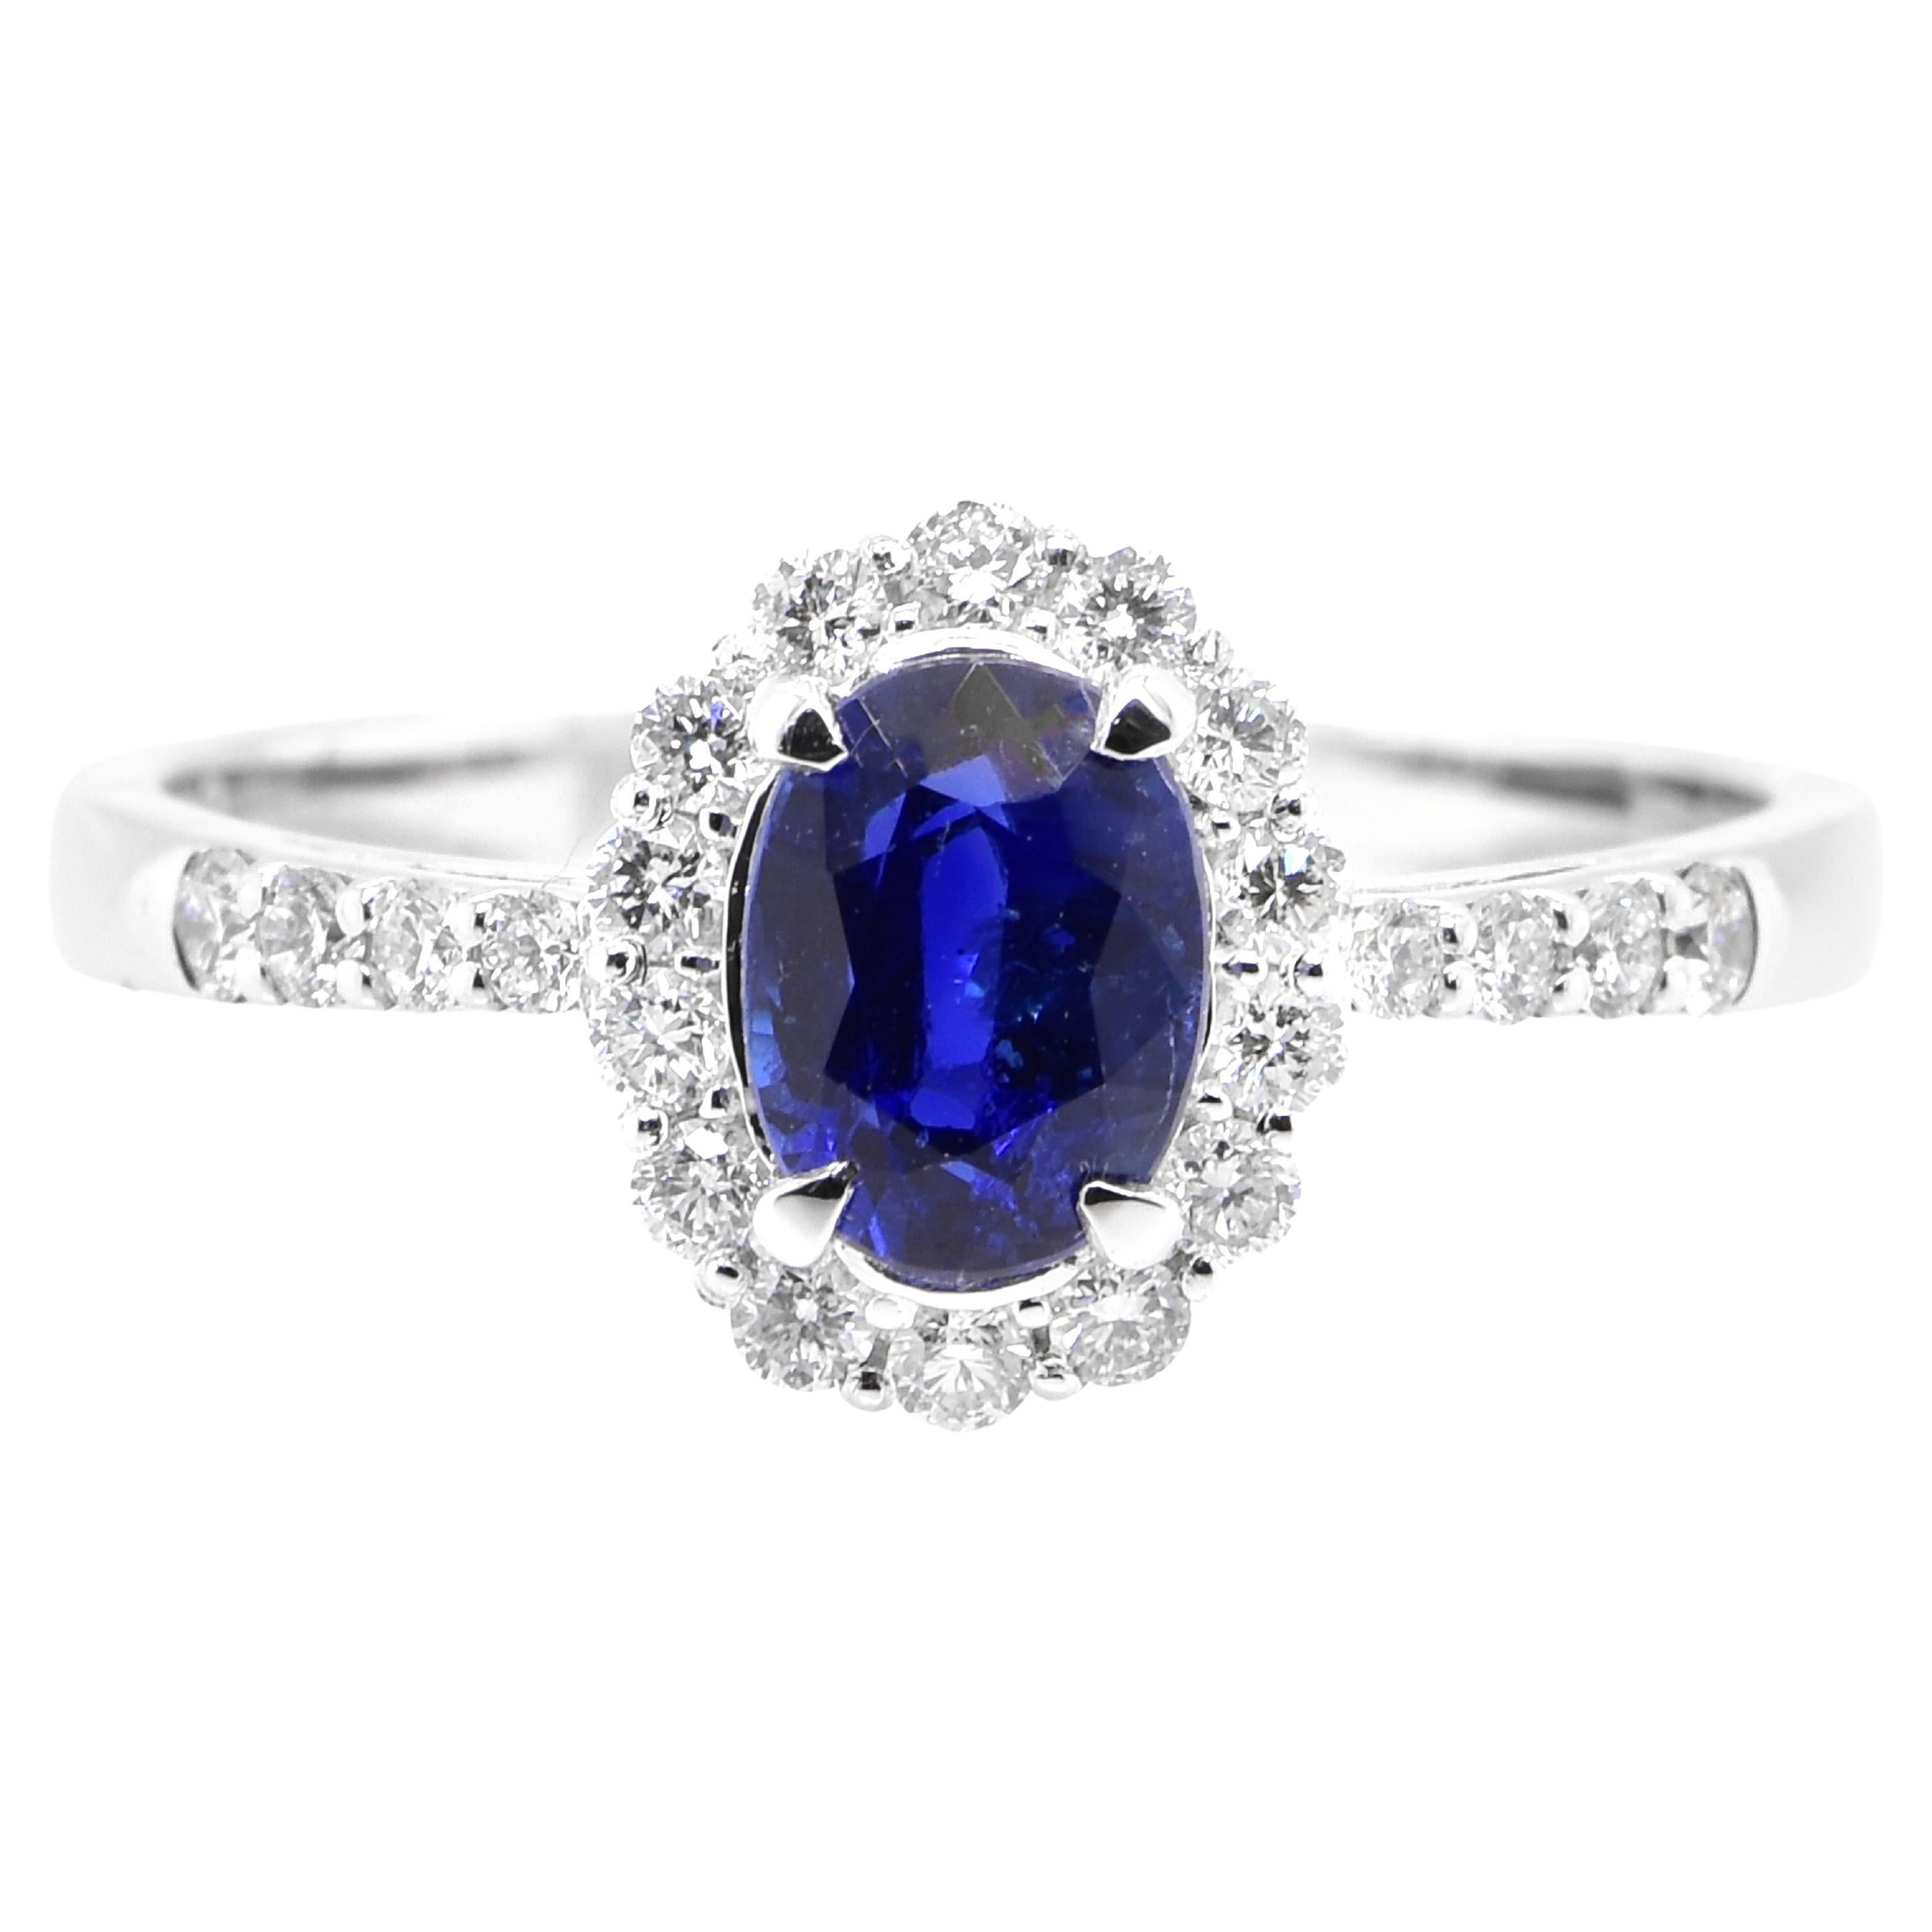 1.07 Carat, Unheated, Royal Blue Color Sapphire and Diamond Ring Set in Platinum